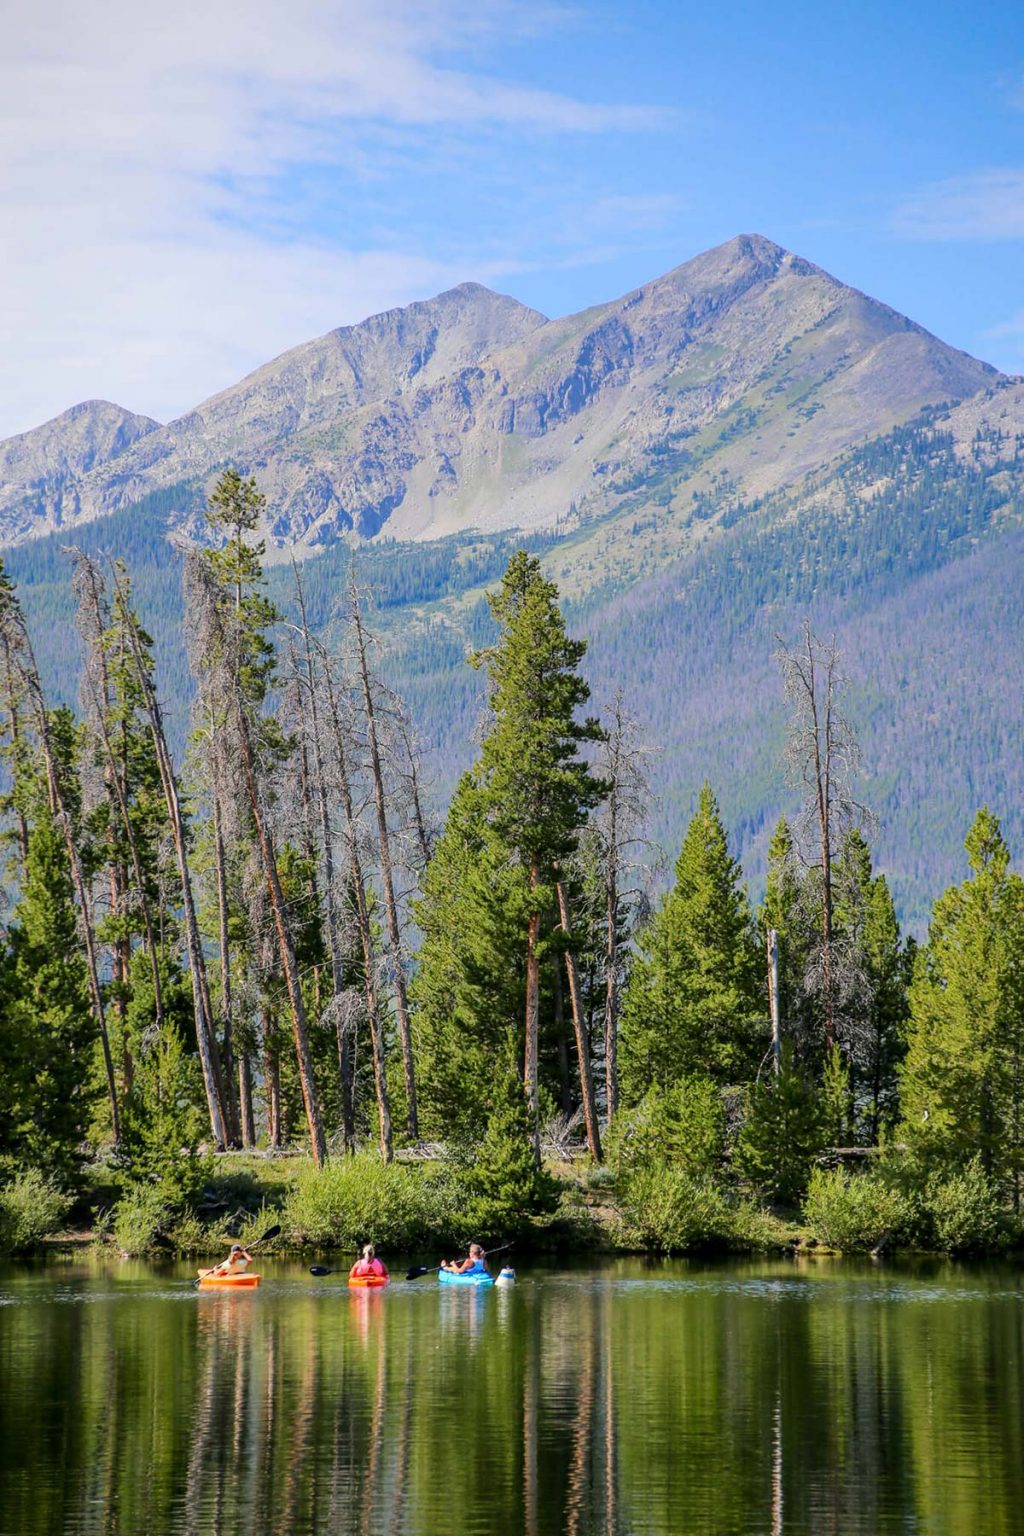 Kayakers in a cove on Lake Dillon at Breckenridge